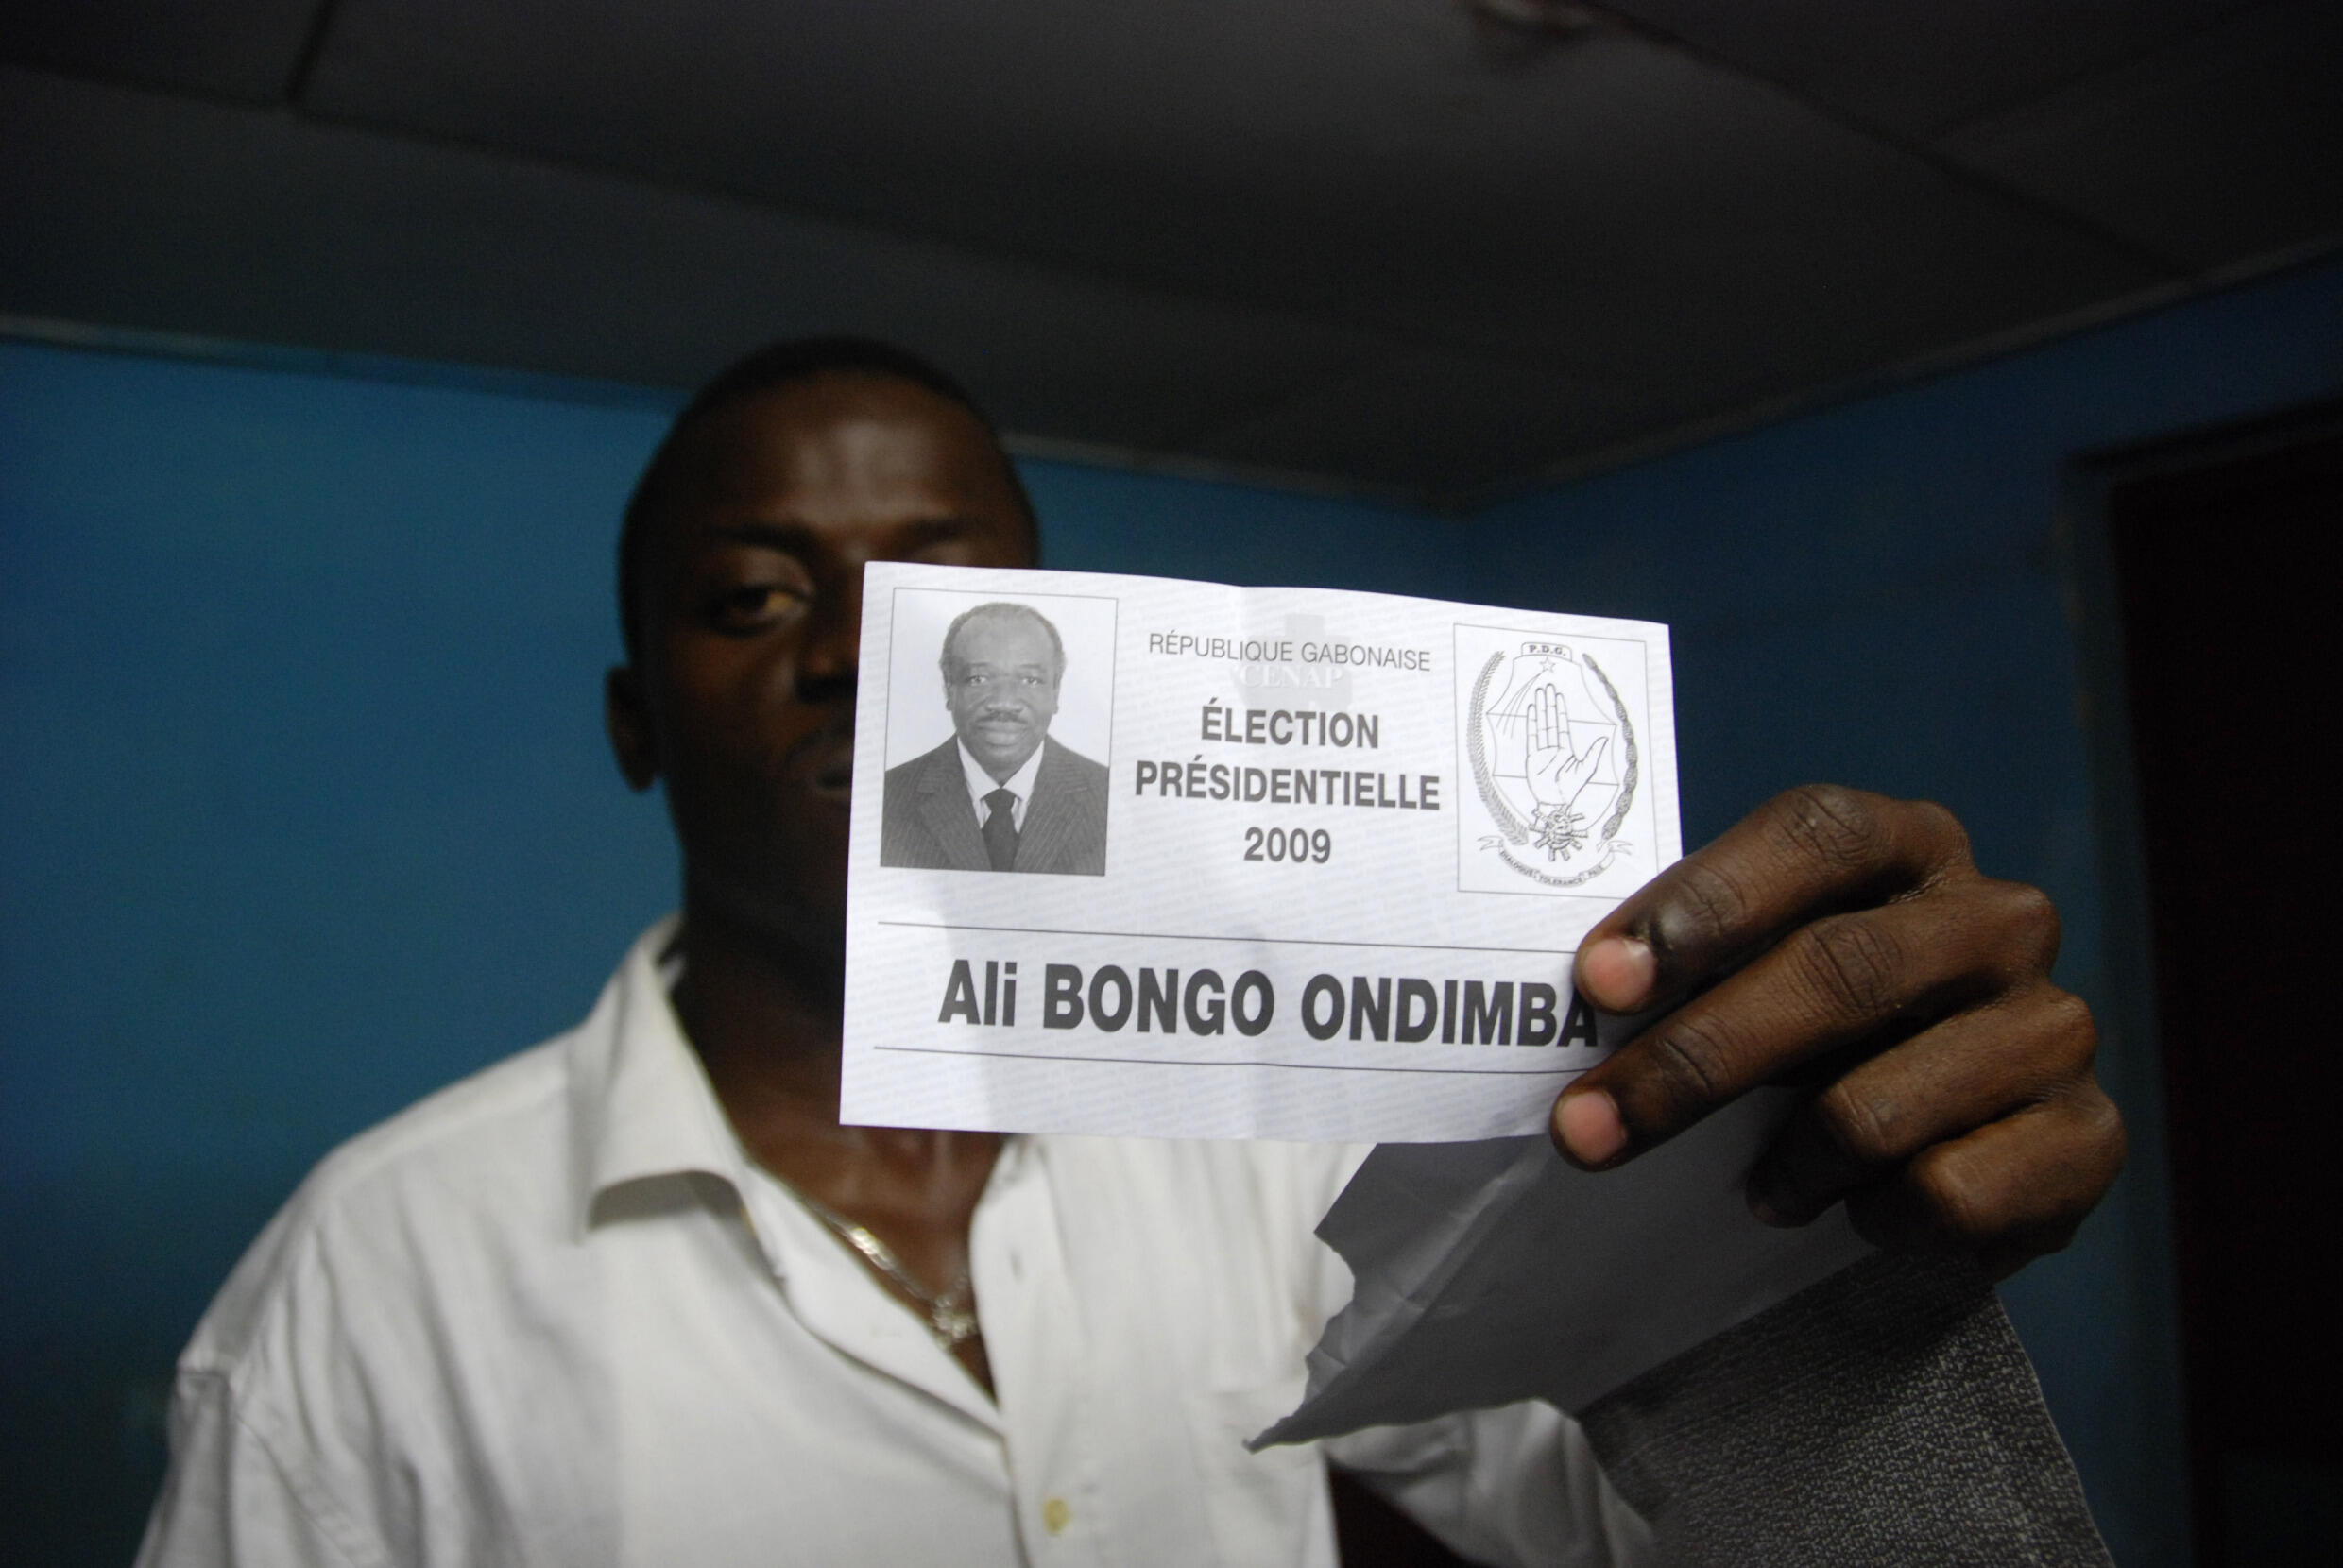 An electoral worker holds up a ballot during the counting of the presidential election at a polling station in Libreville, Gabon August 30, 2009.